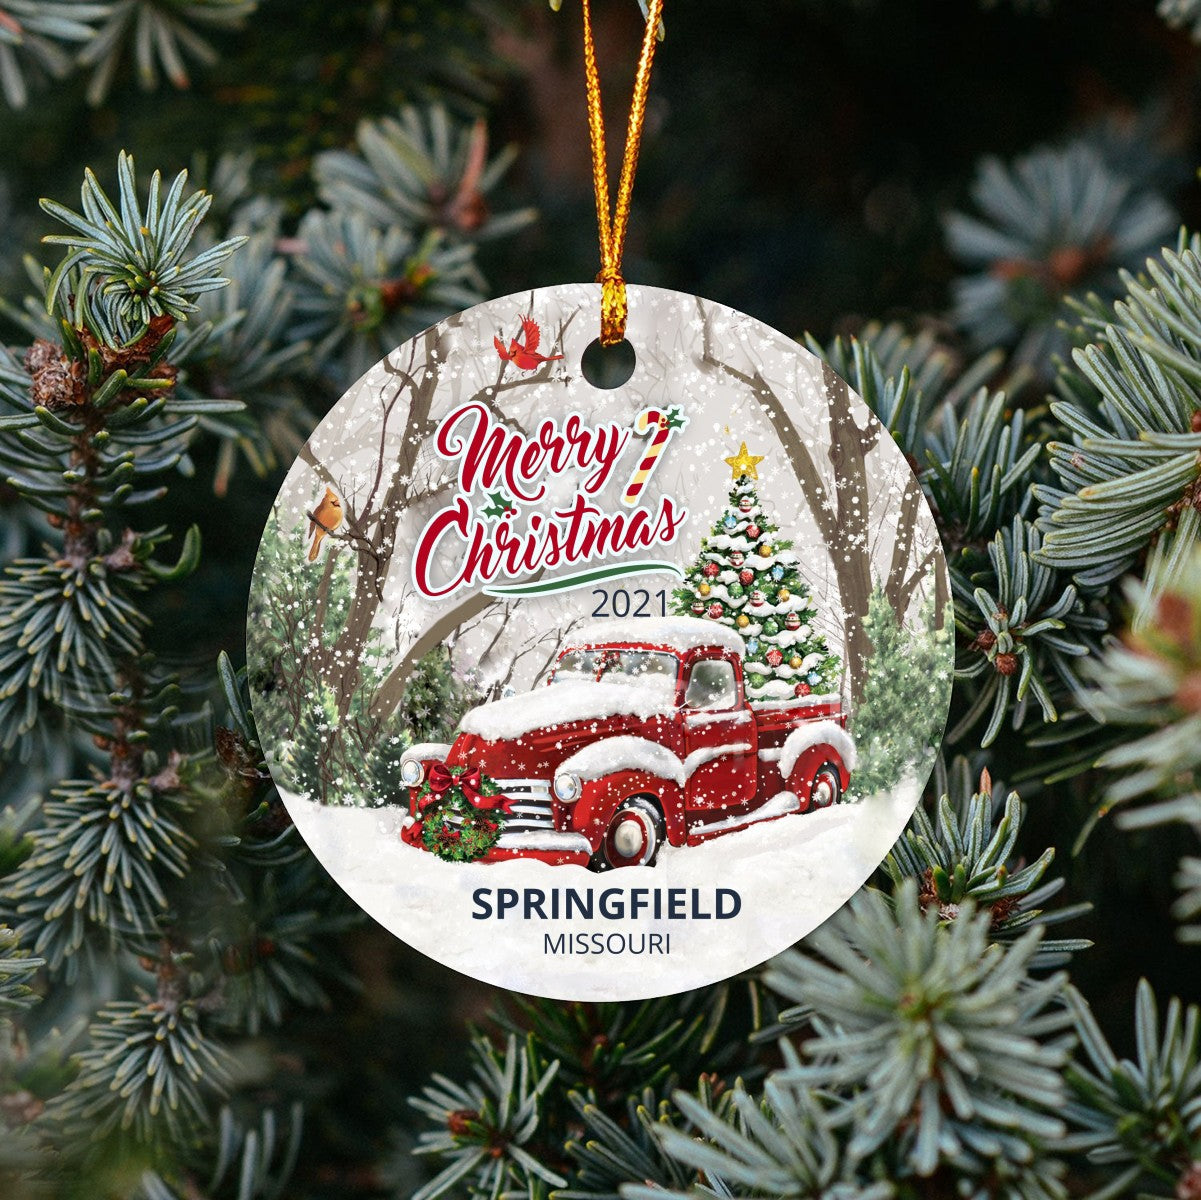 Christmas Tree Ornaments Springfield - Ornament Customize With Name City And State Springfield Missouri MO - Red Truck Xmas Ornaments 3'' Plastic Gift For Family, Friend And Housewarming